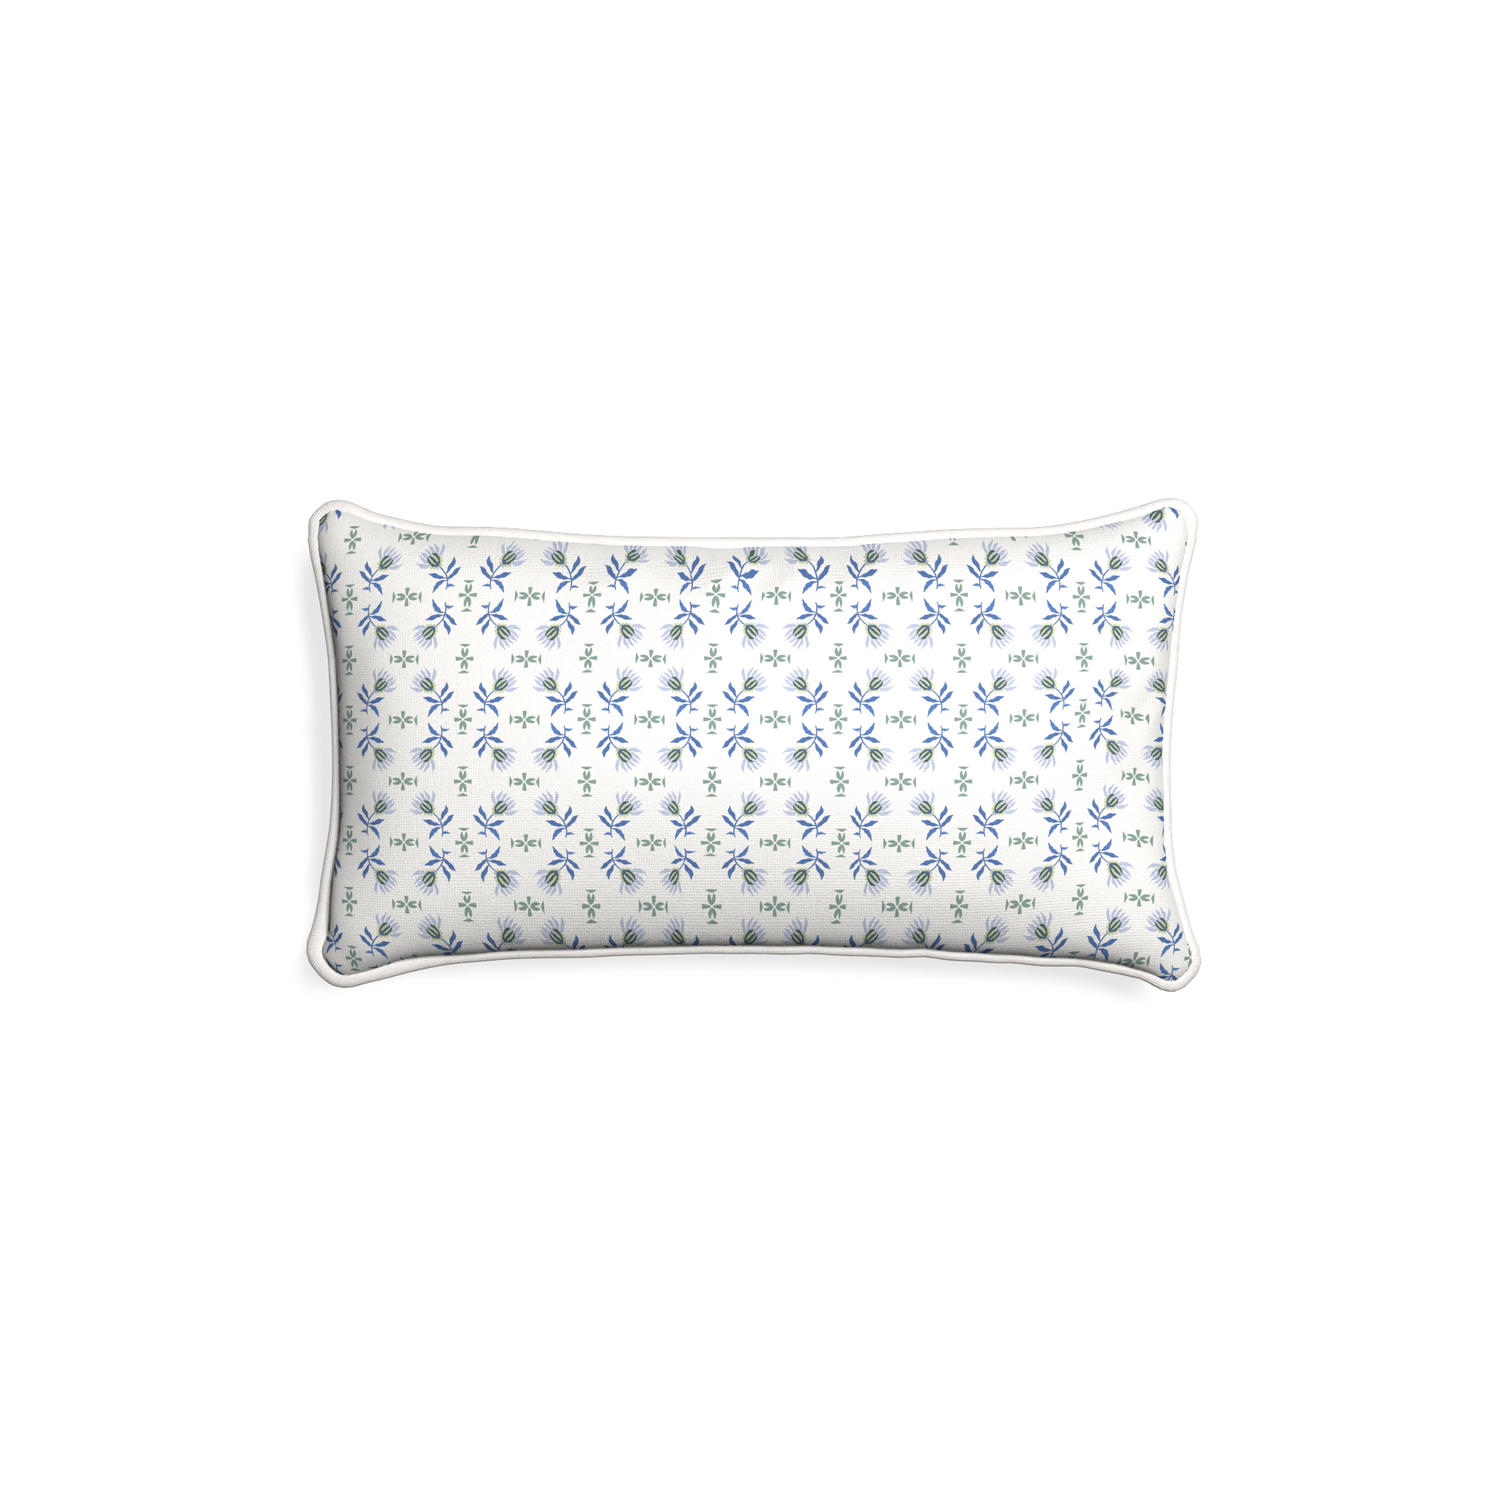 Petite-lumbar lee custom blue & green floralpillow with snow piping on white background